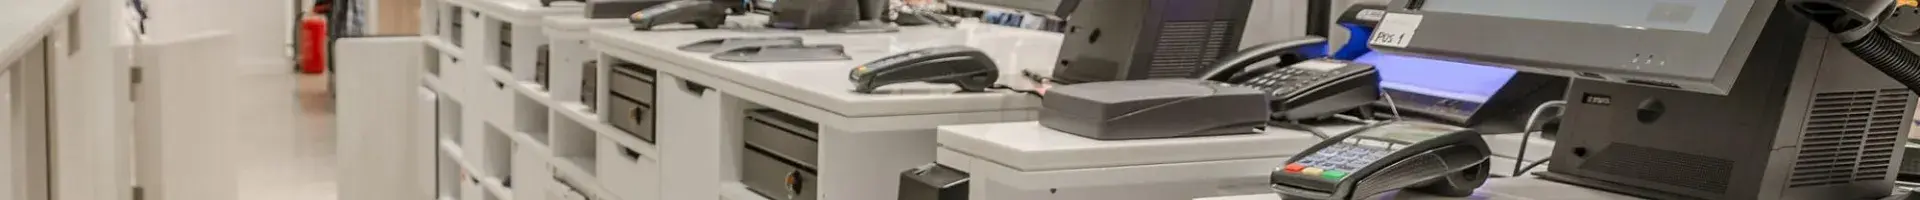 The Inside of a Retail Store Behind the Counter with Five Clean Cash Registers